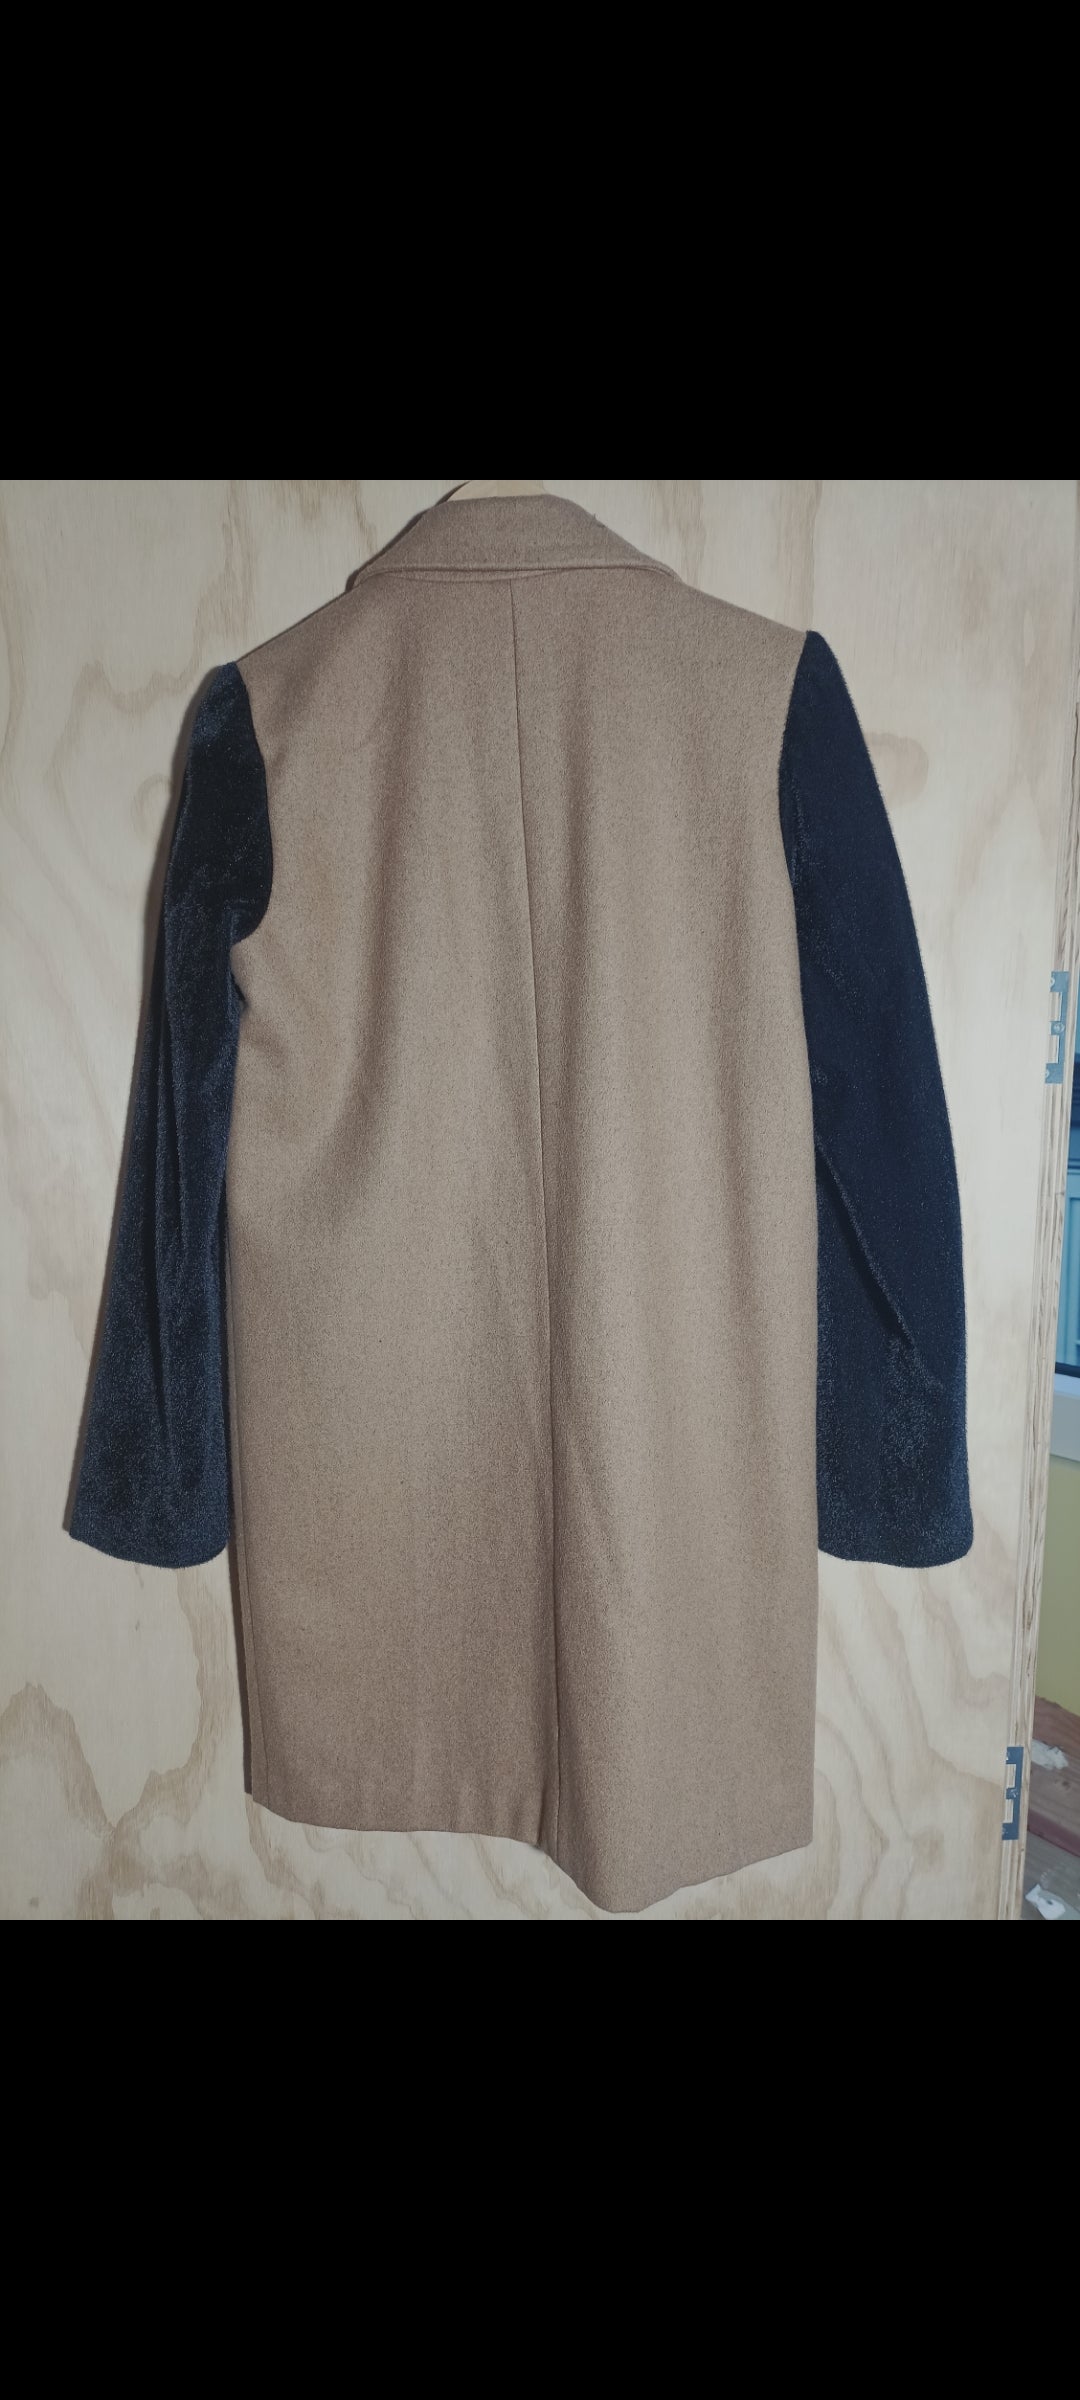 BDG - Camel Wool Mix Coat with Black Faux Fur Sleeves - Size M